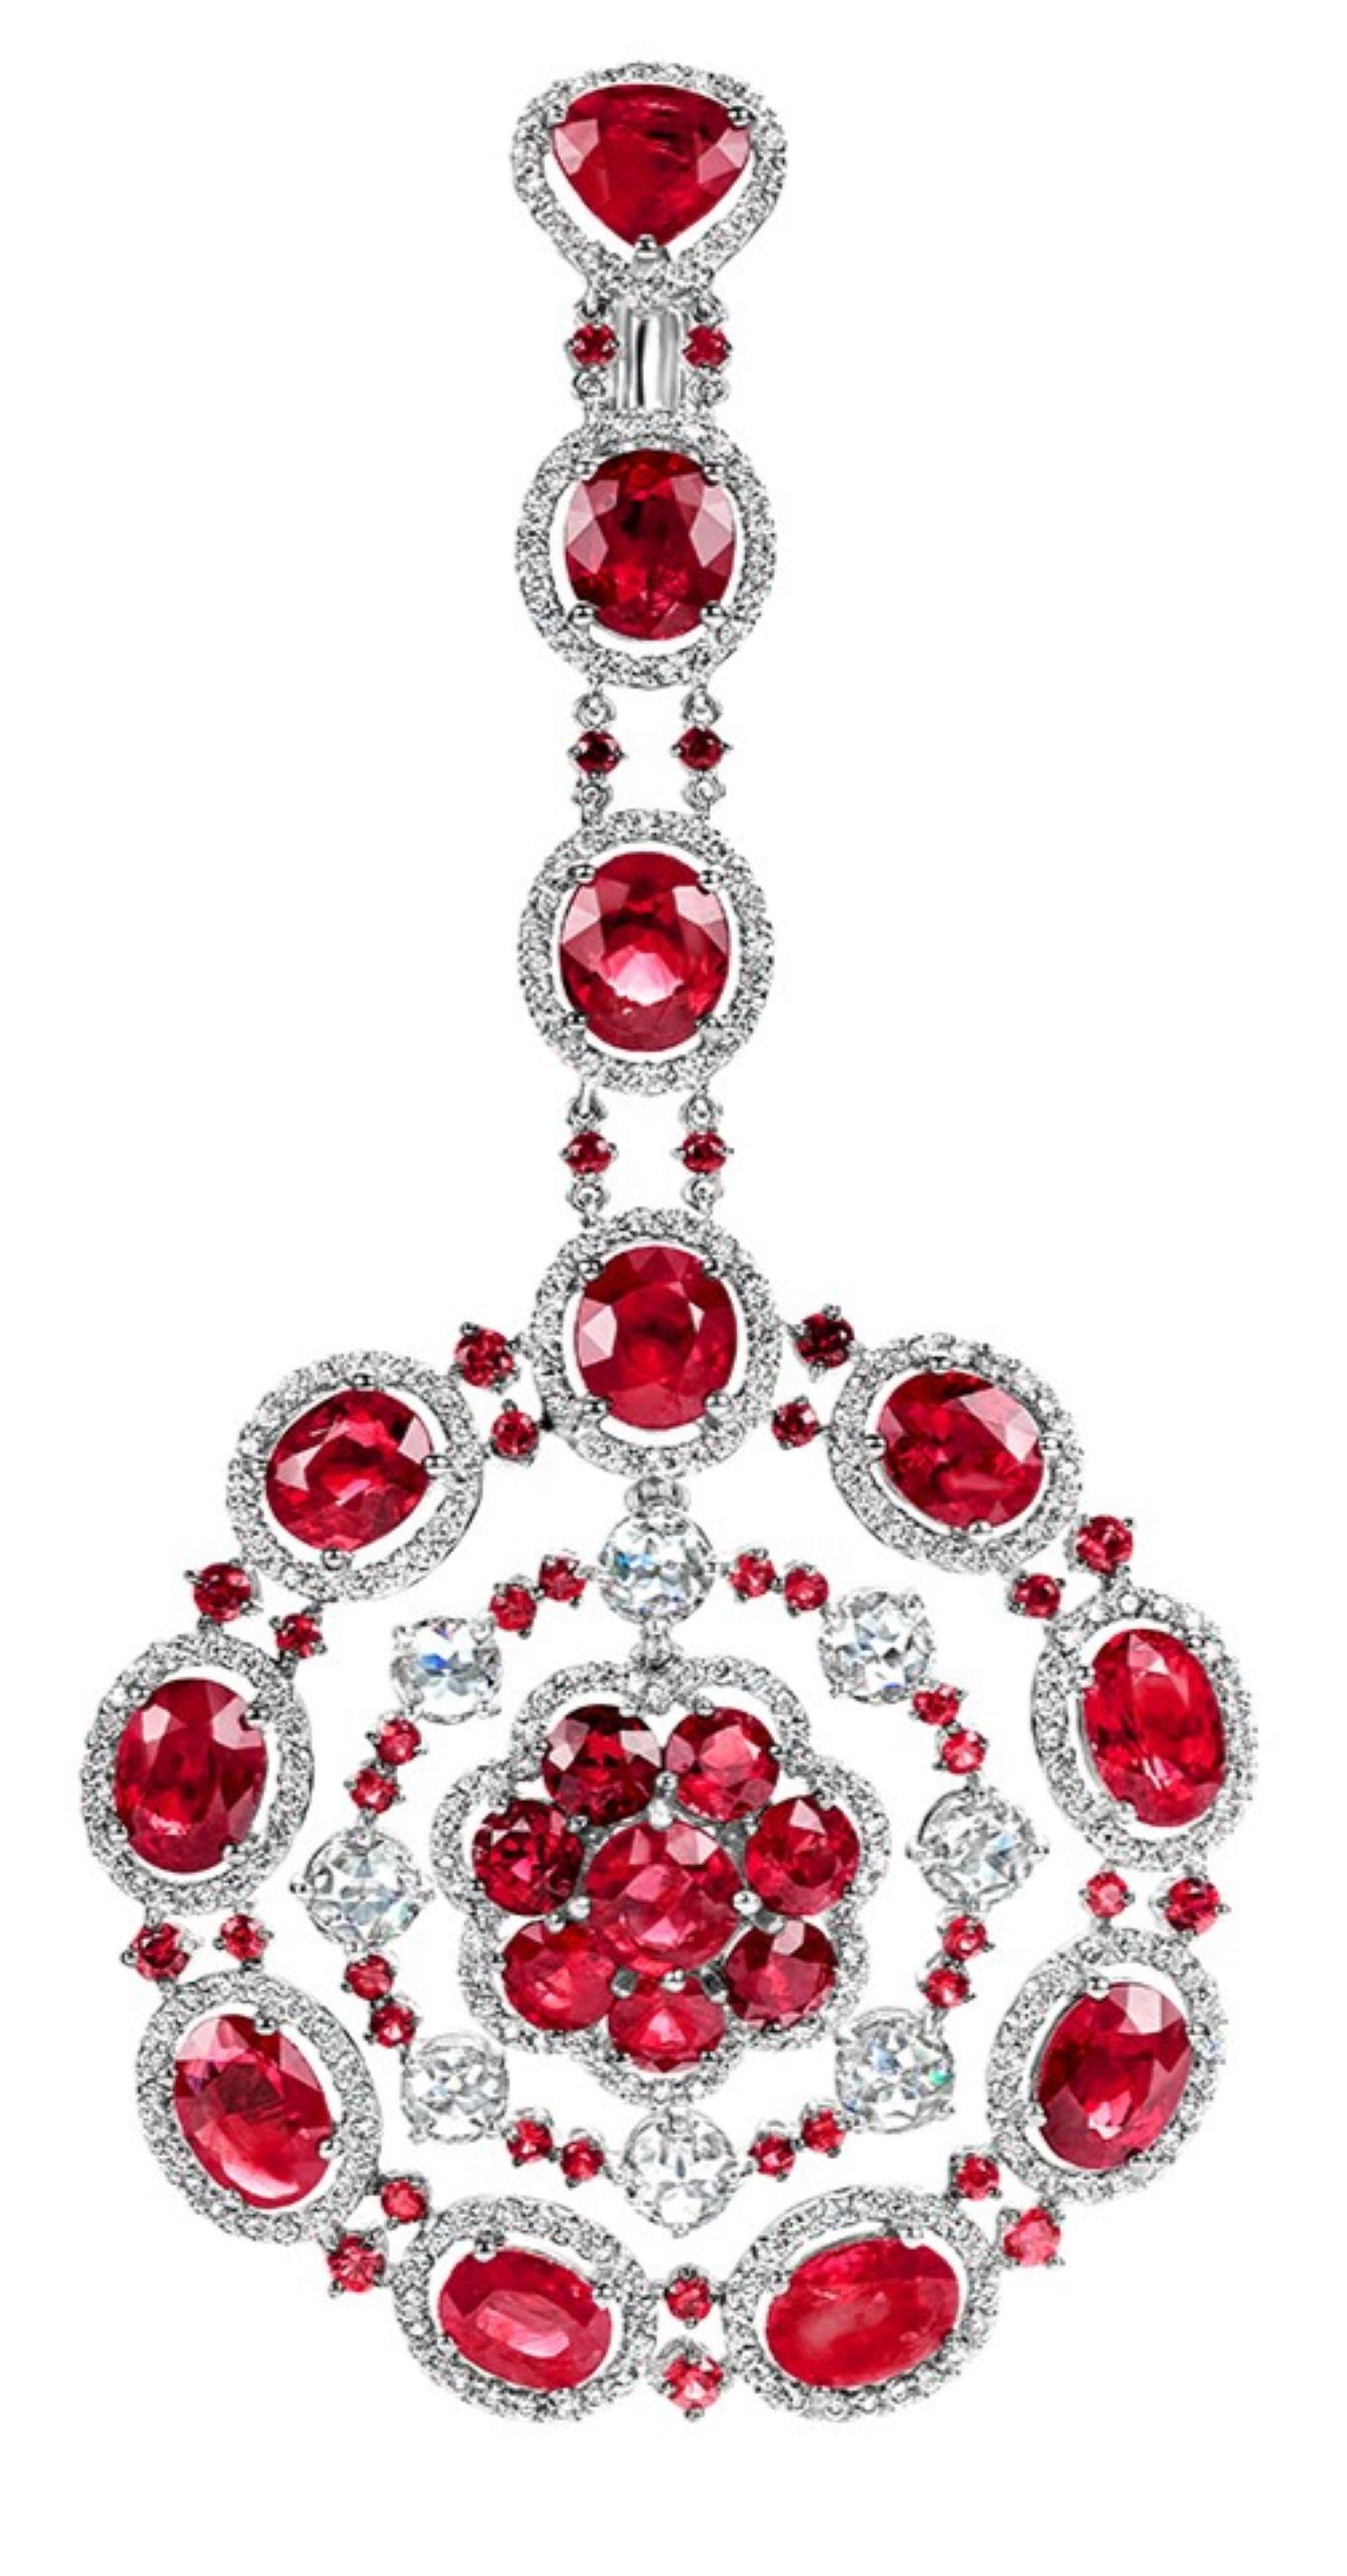 18 Kt Gold 62.15 Ct Ruby & 5.93 Ct Diamonds Dangle Earrings 

Amazing One Of A Kind Piece Of Art

Rubies : 62.15 Ct
Diamonds : 5.93 Ct Rose Cut & Brilliant Cut
